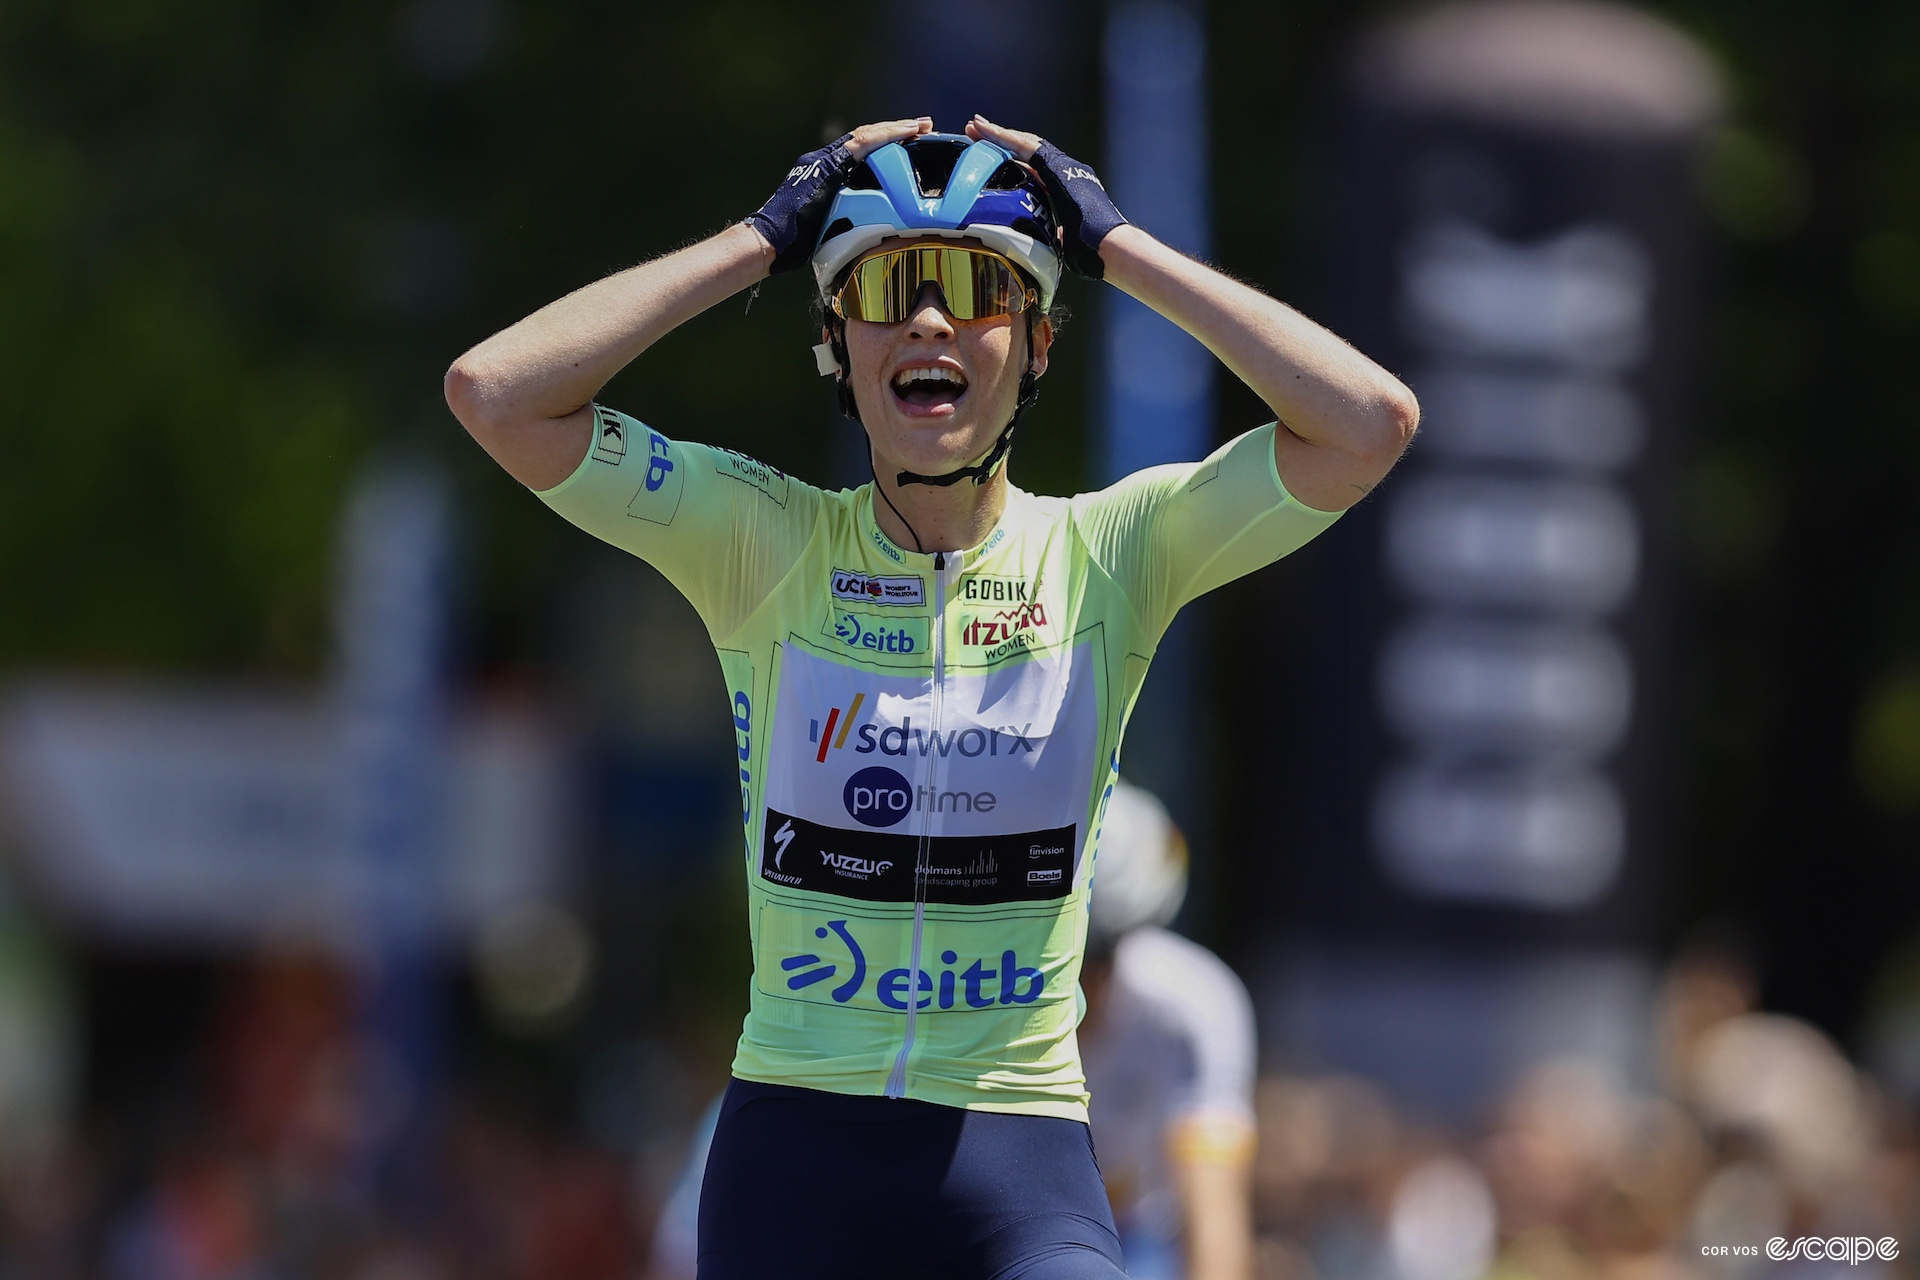 Mischa Bredewold holds her head in her hands in shock as she crosses the finish line of a bike race 